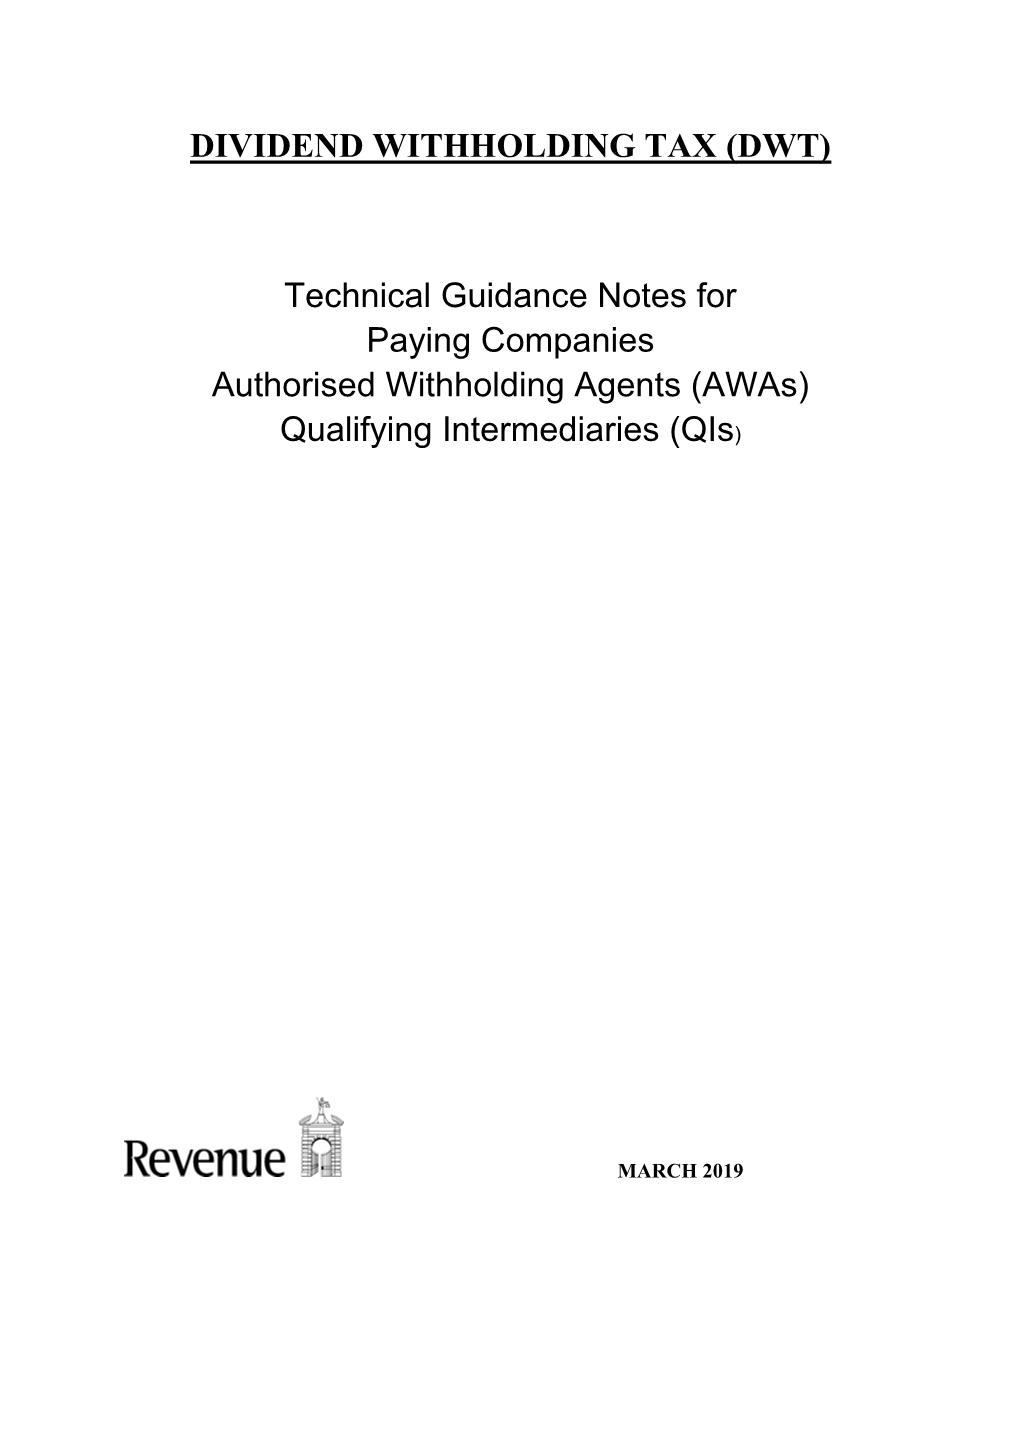 DIVIDEND WITHHOLDING TAX (DWT) Technical Guidance Notes